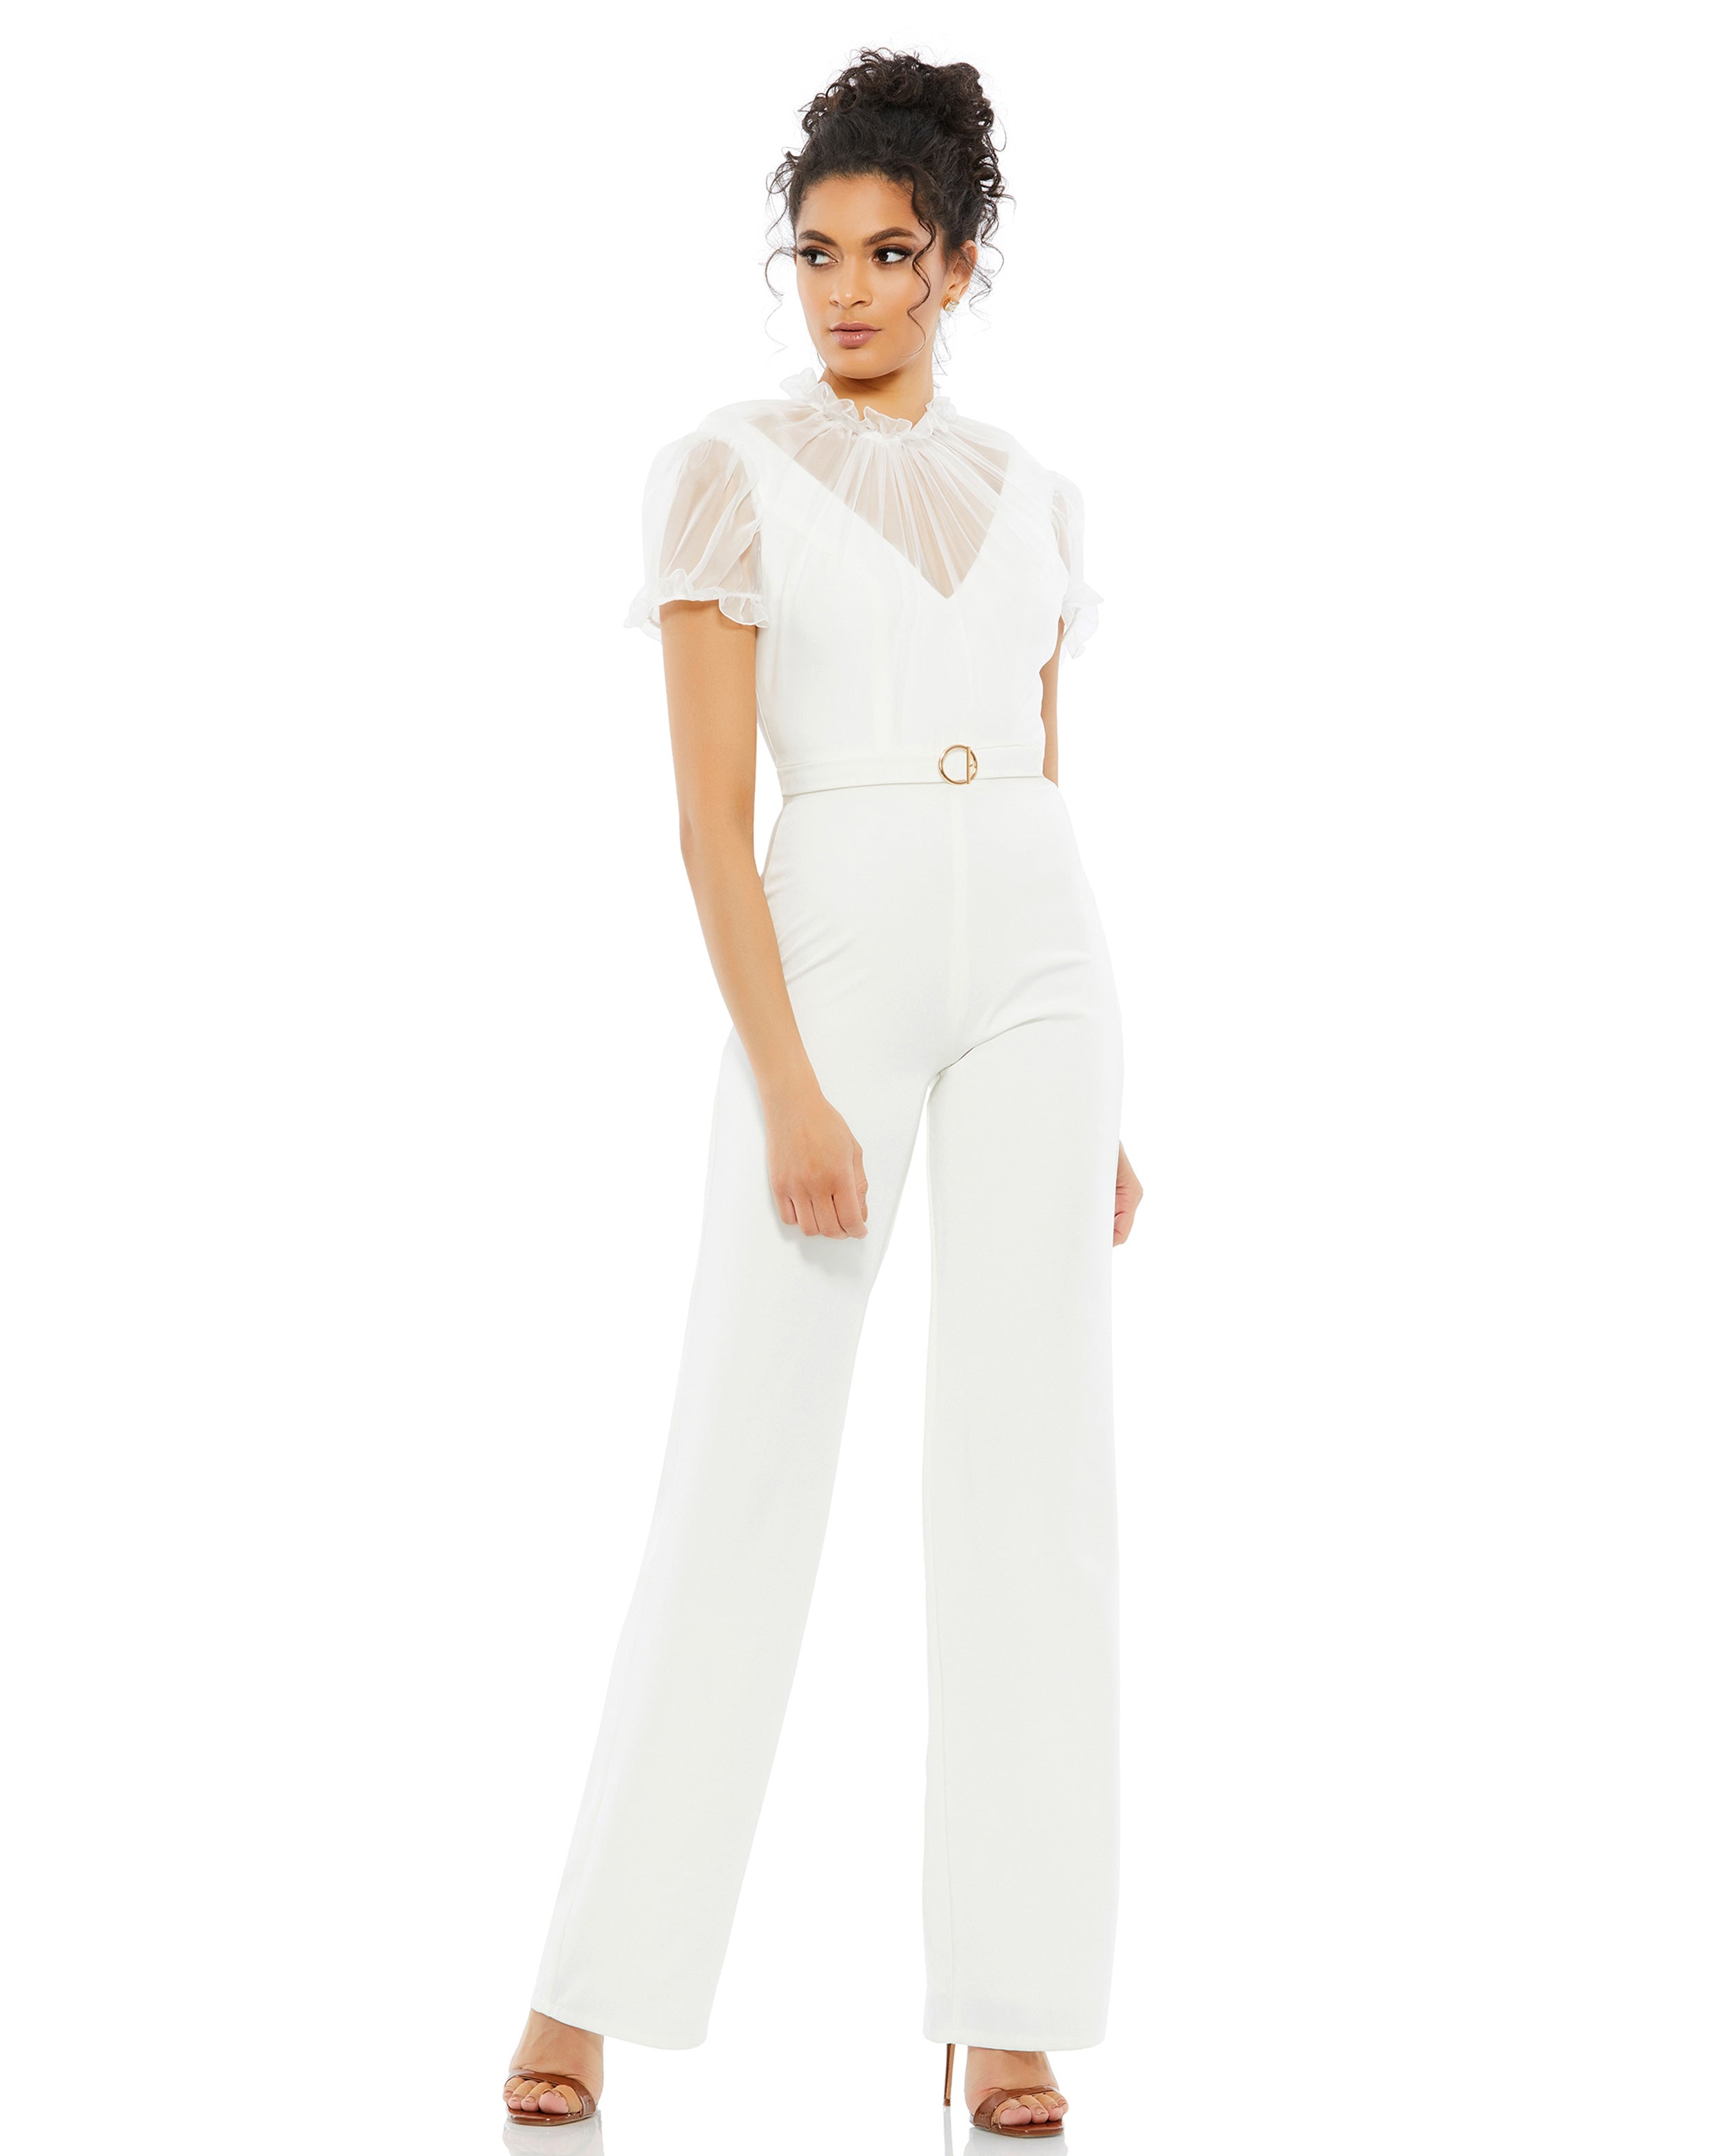 Belted Illusion High Neck Cap Sleeve Jumpsuit